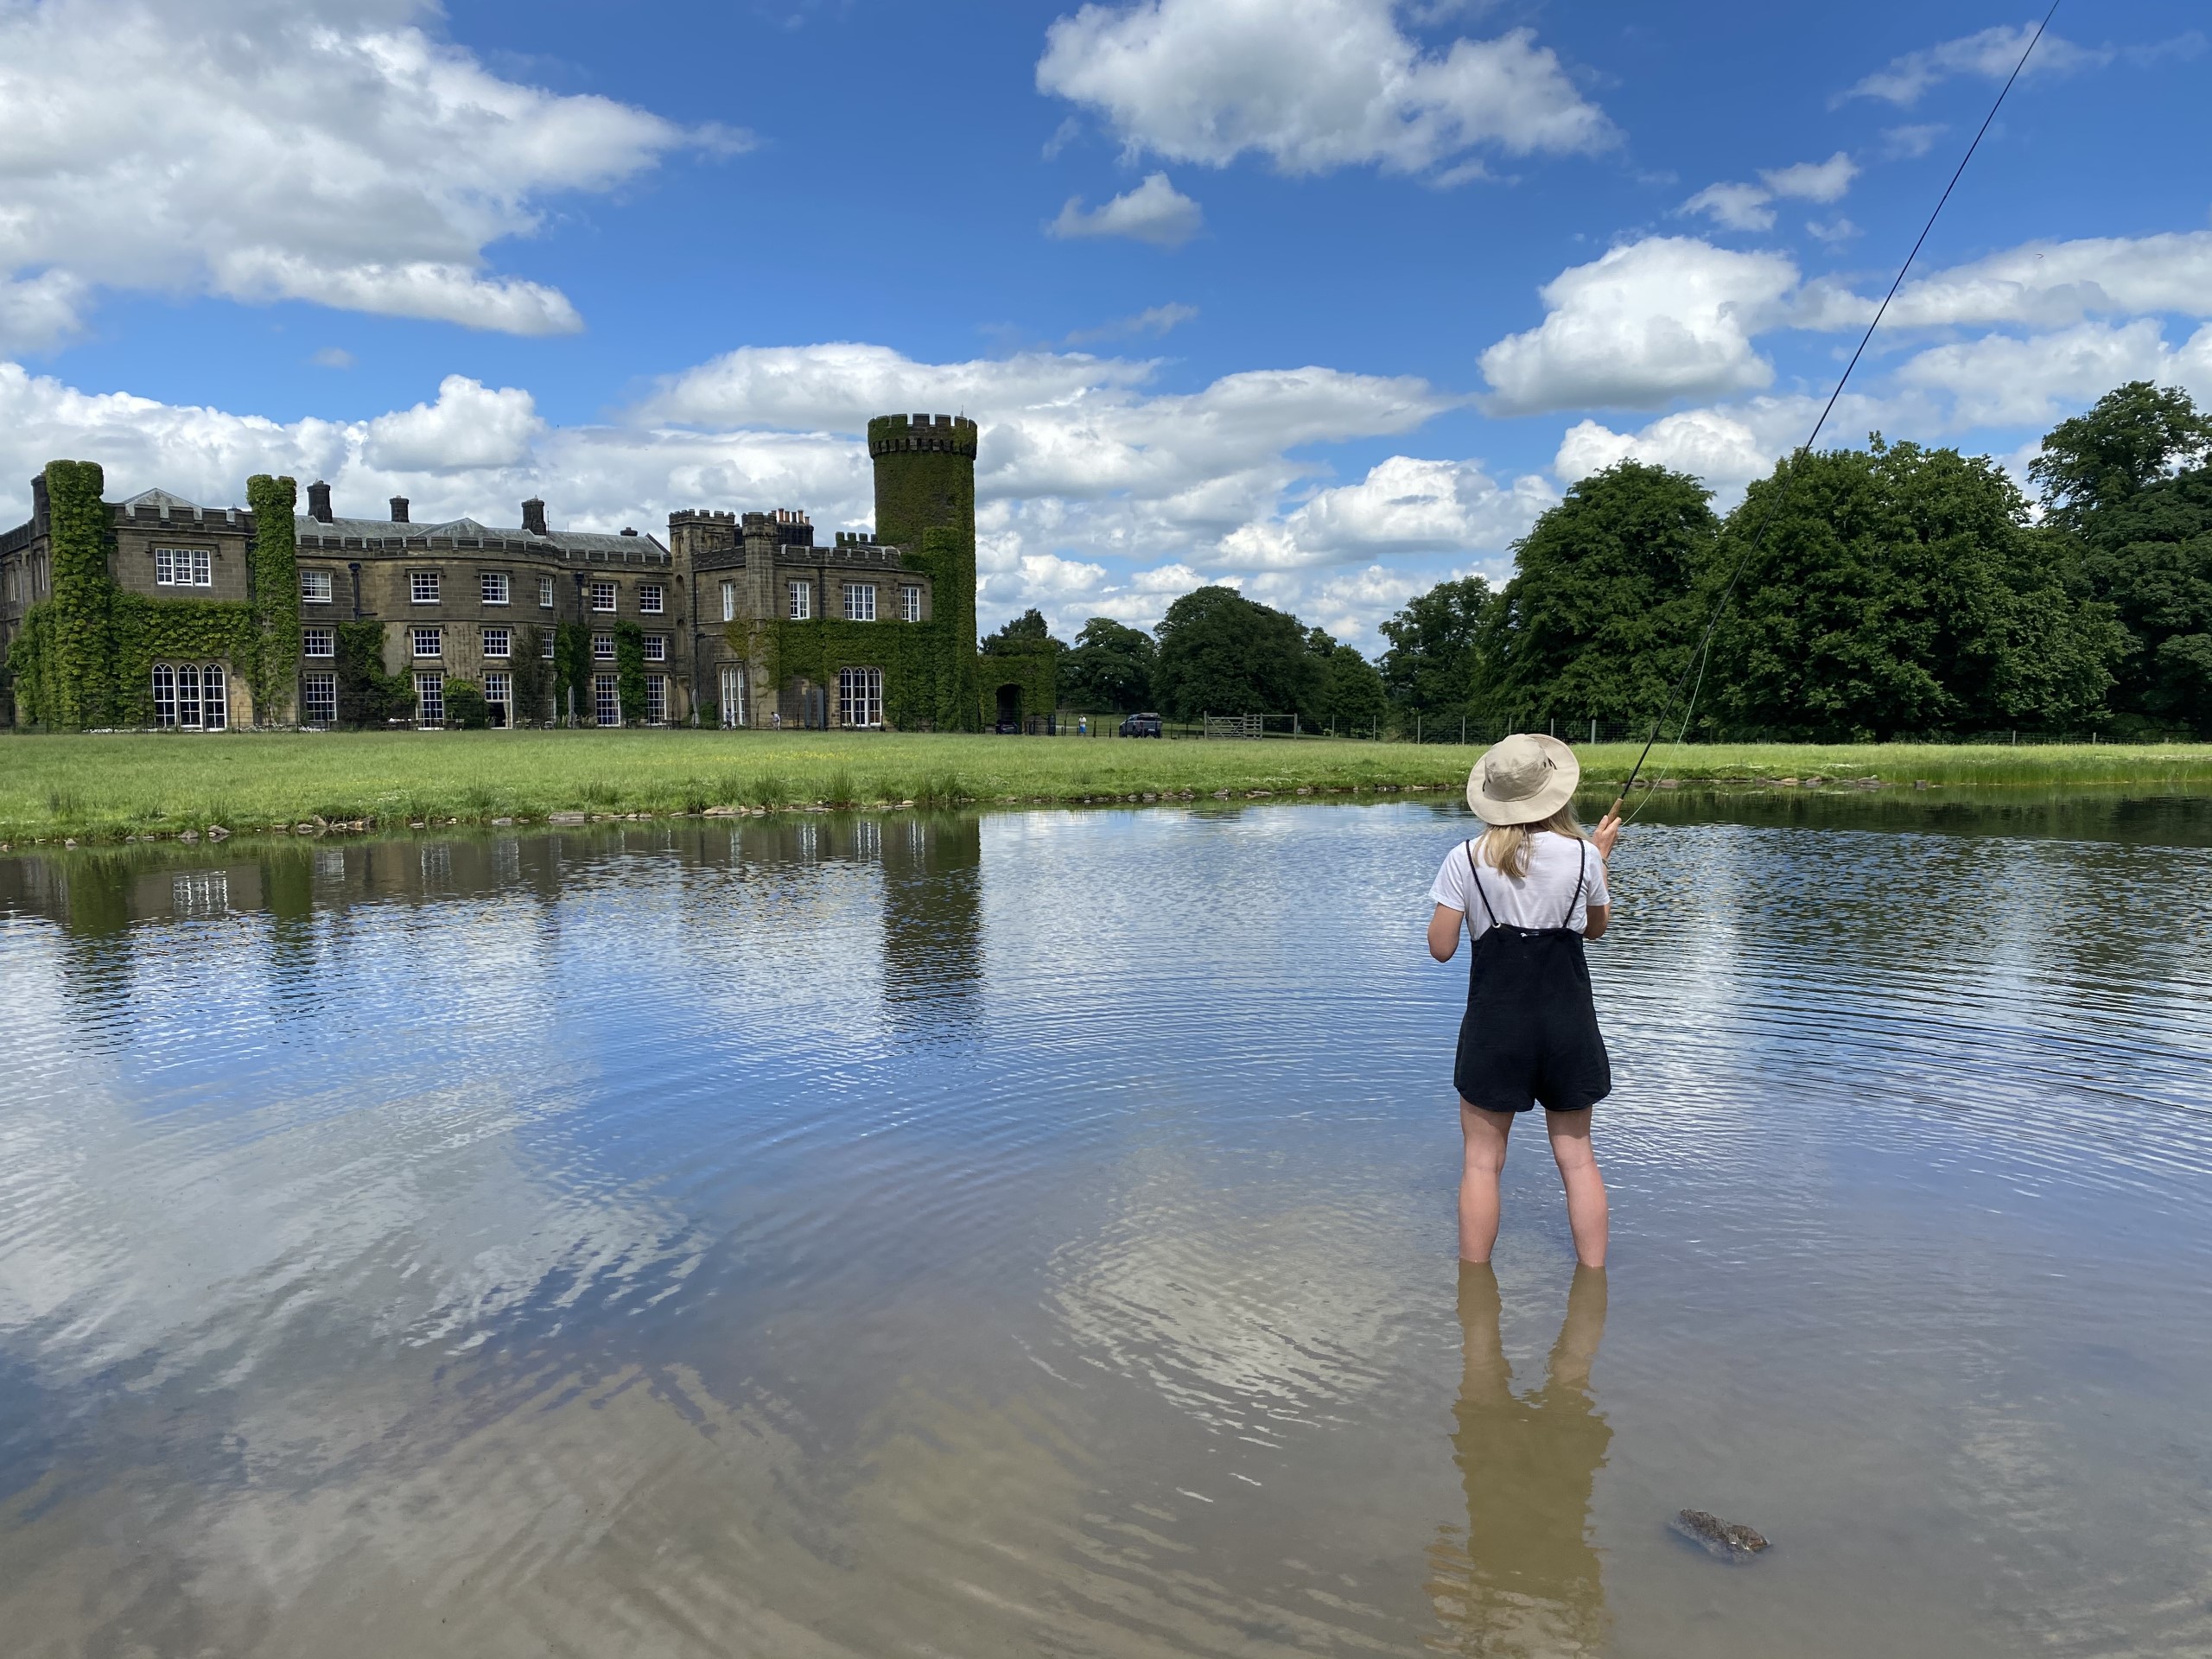 A woman fishing in a lake in front of Swinton Park Hotel in North Yorkshire